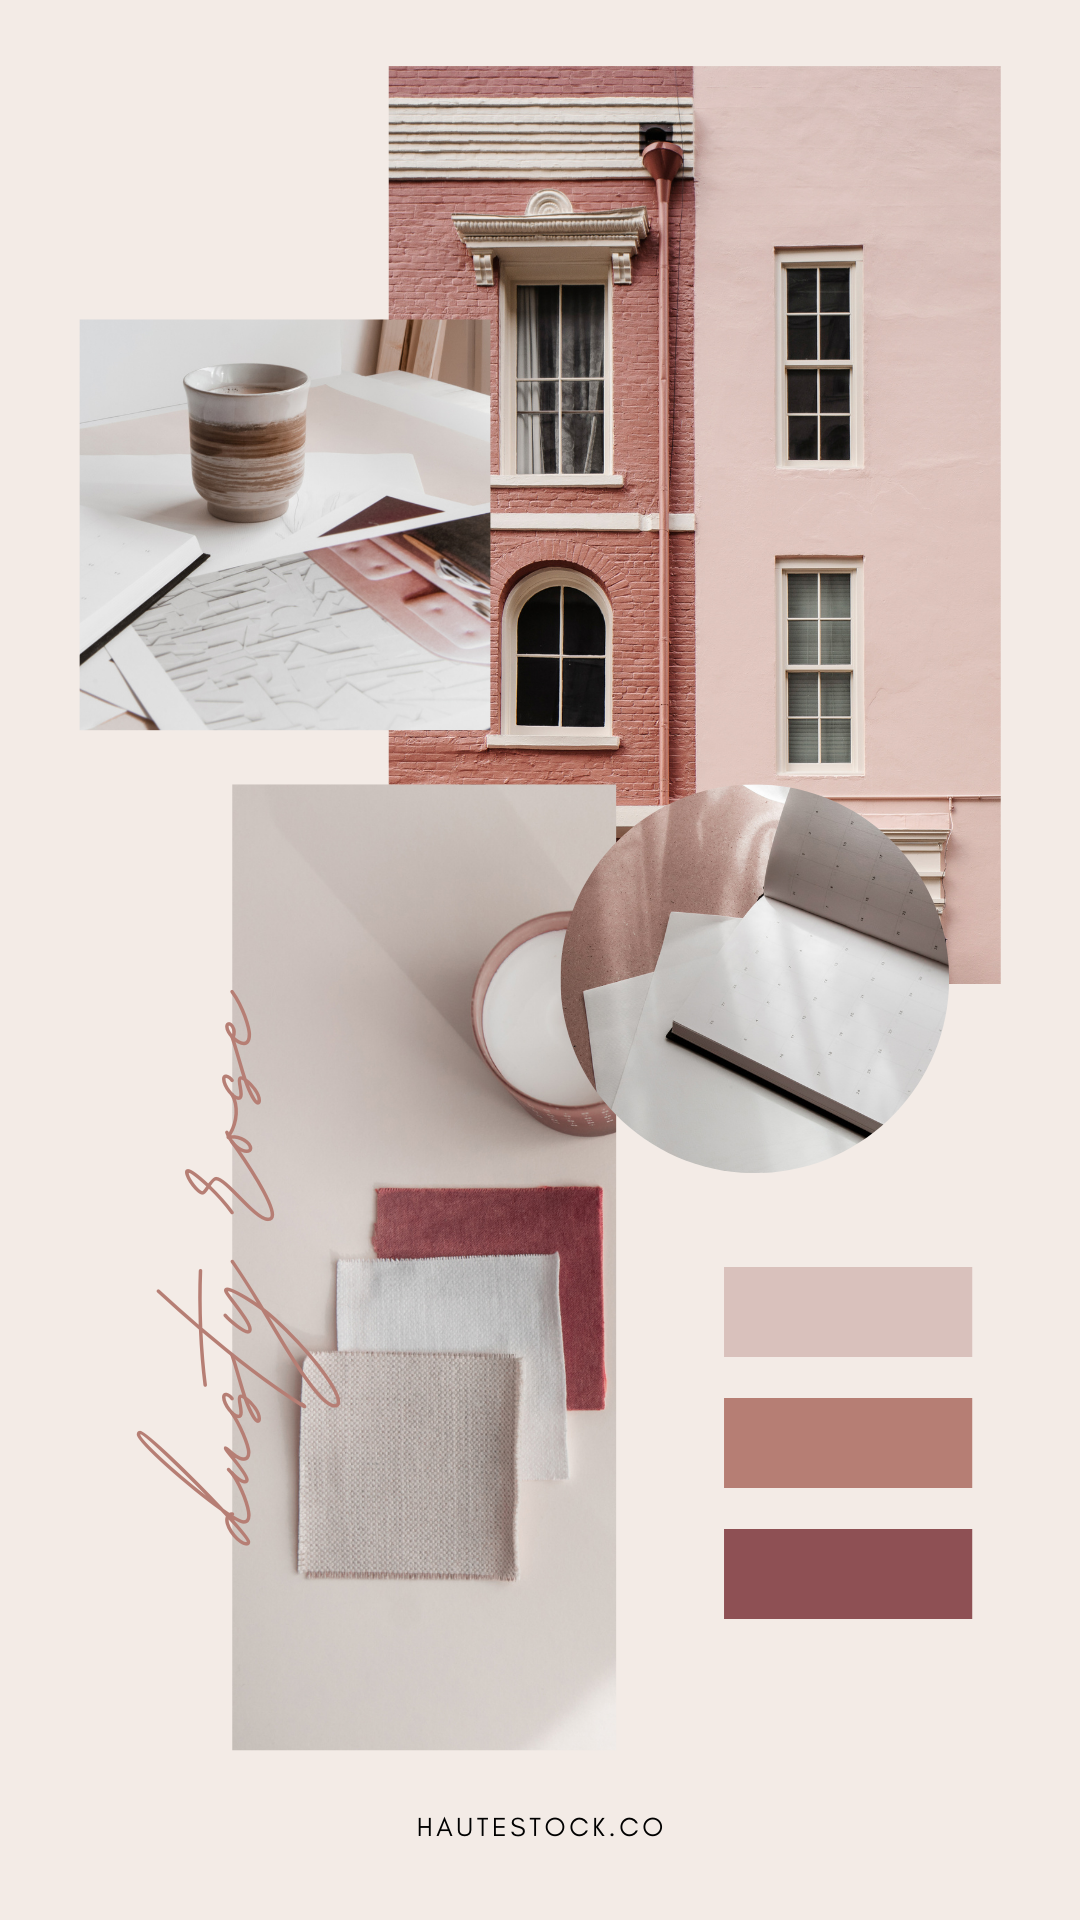 Dusty rose styled stock photos for brands with deep earthy red and pink color palettes. Available exclusively from Haute Stock.